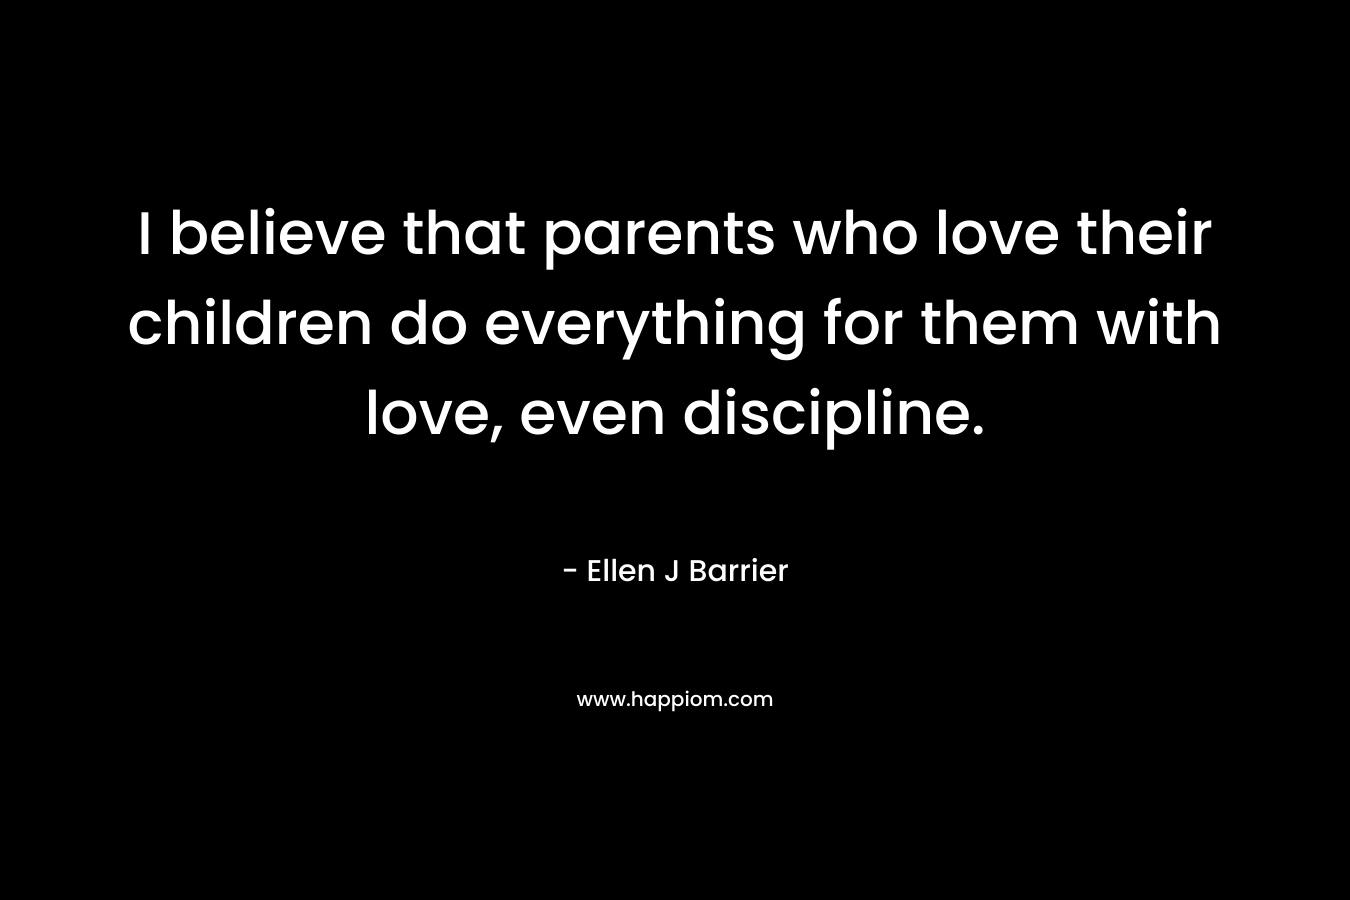 I believe that parents who love their children do everything for them with love, even discipline.